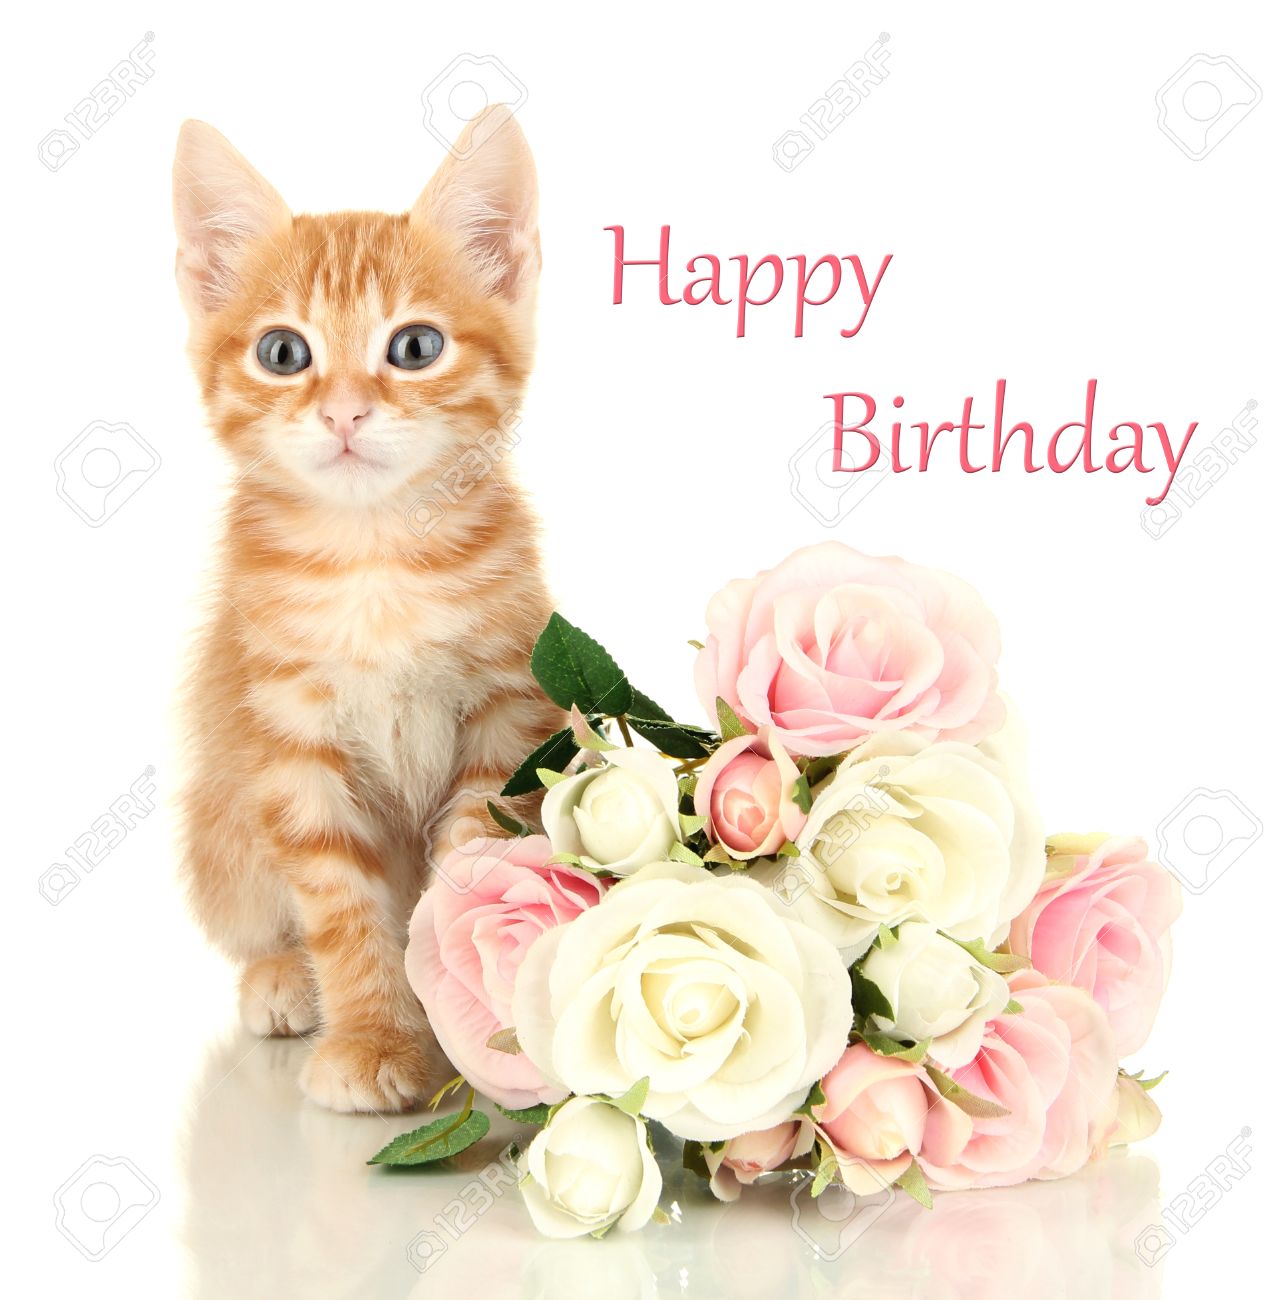 30840347-birthday-postcard-cute-little-red-kitten-with-roses-isolated-on-white.jpg